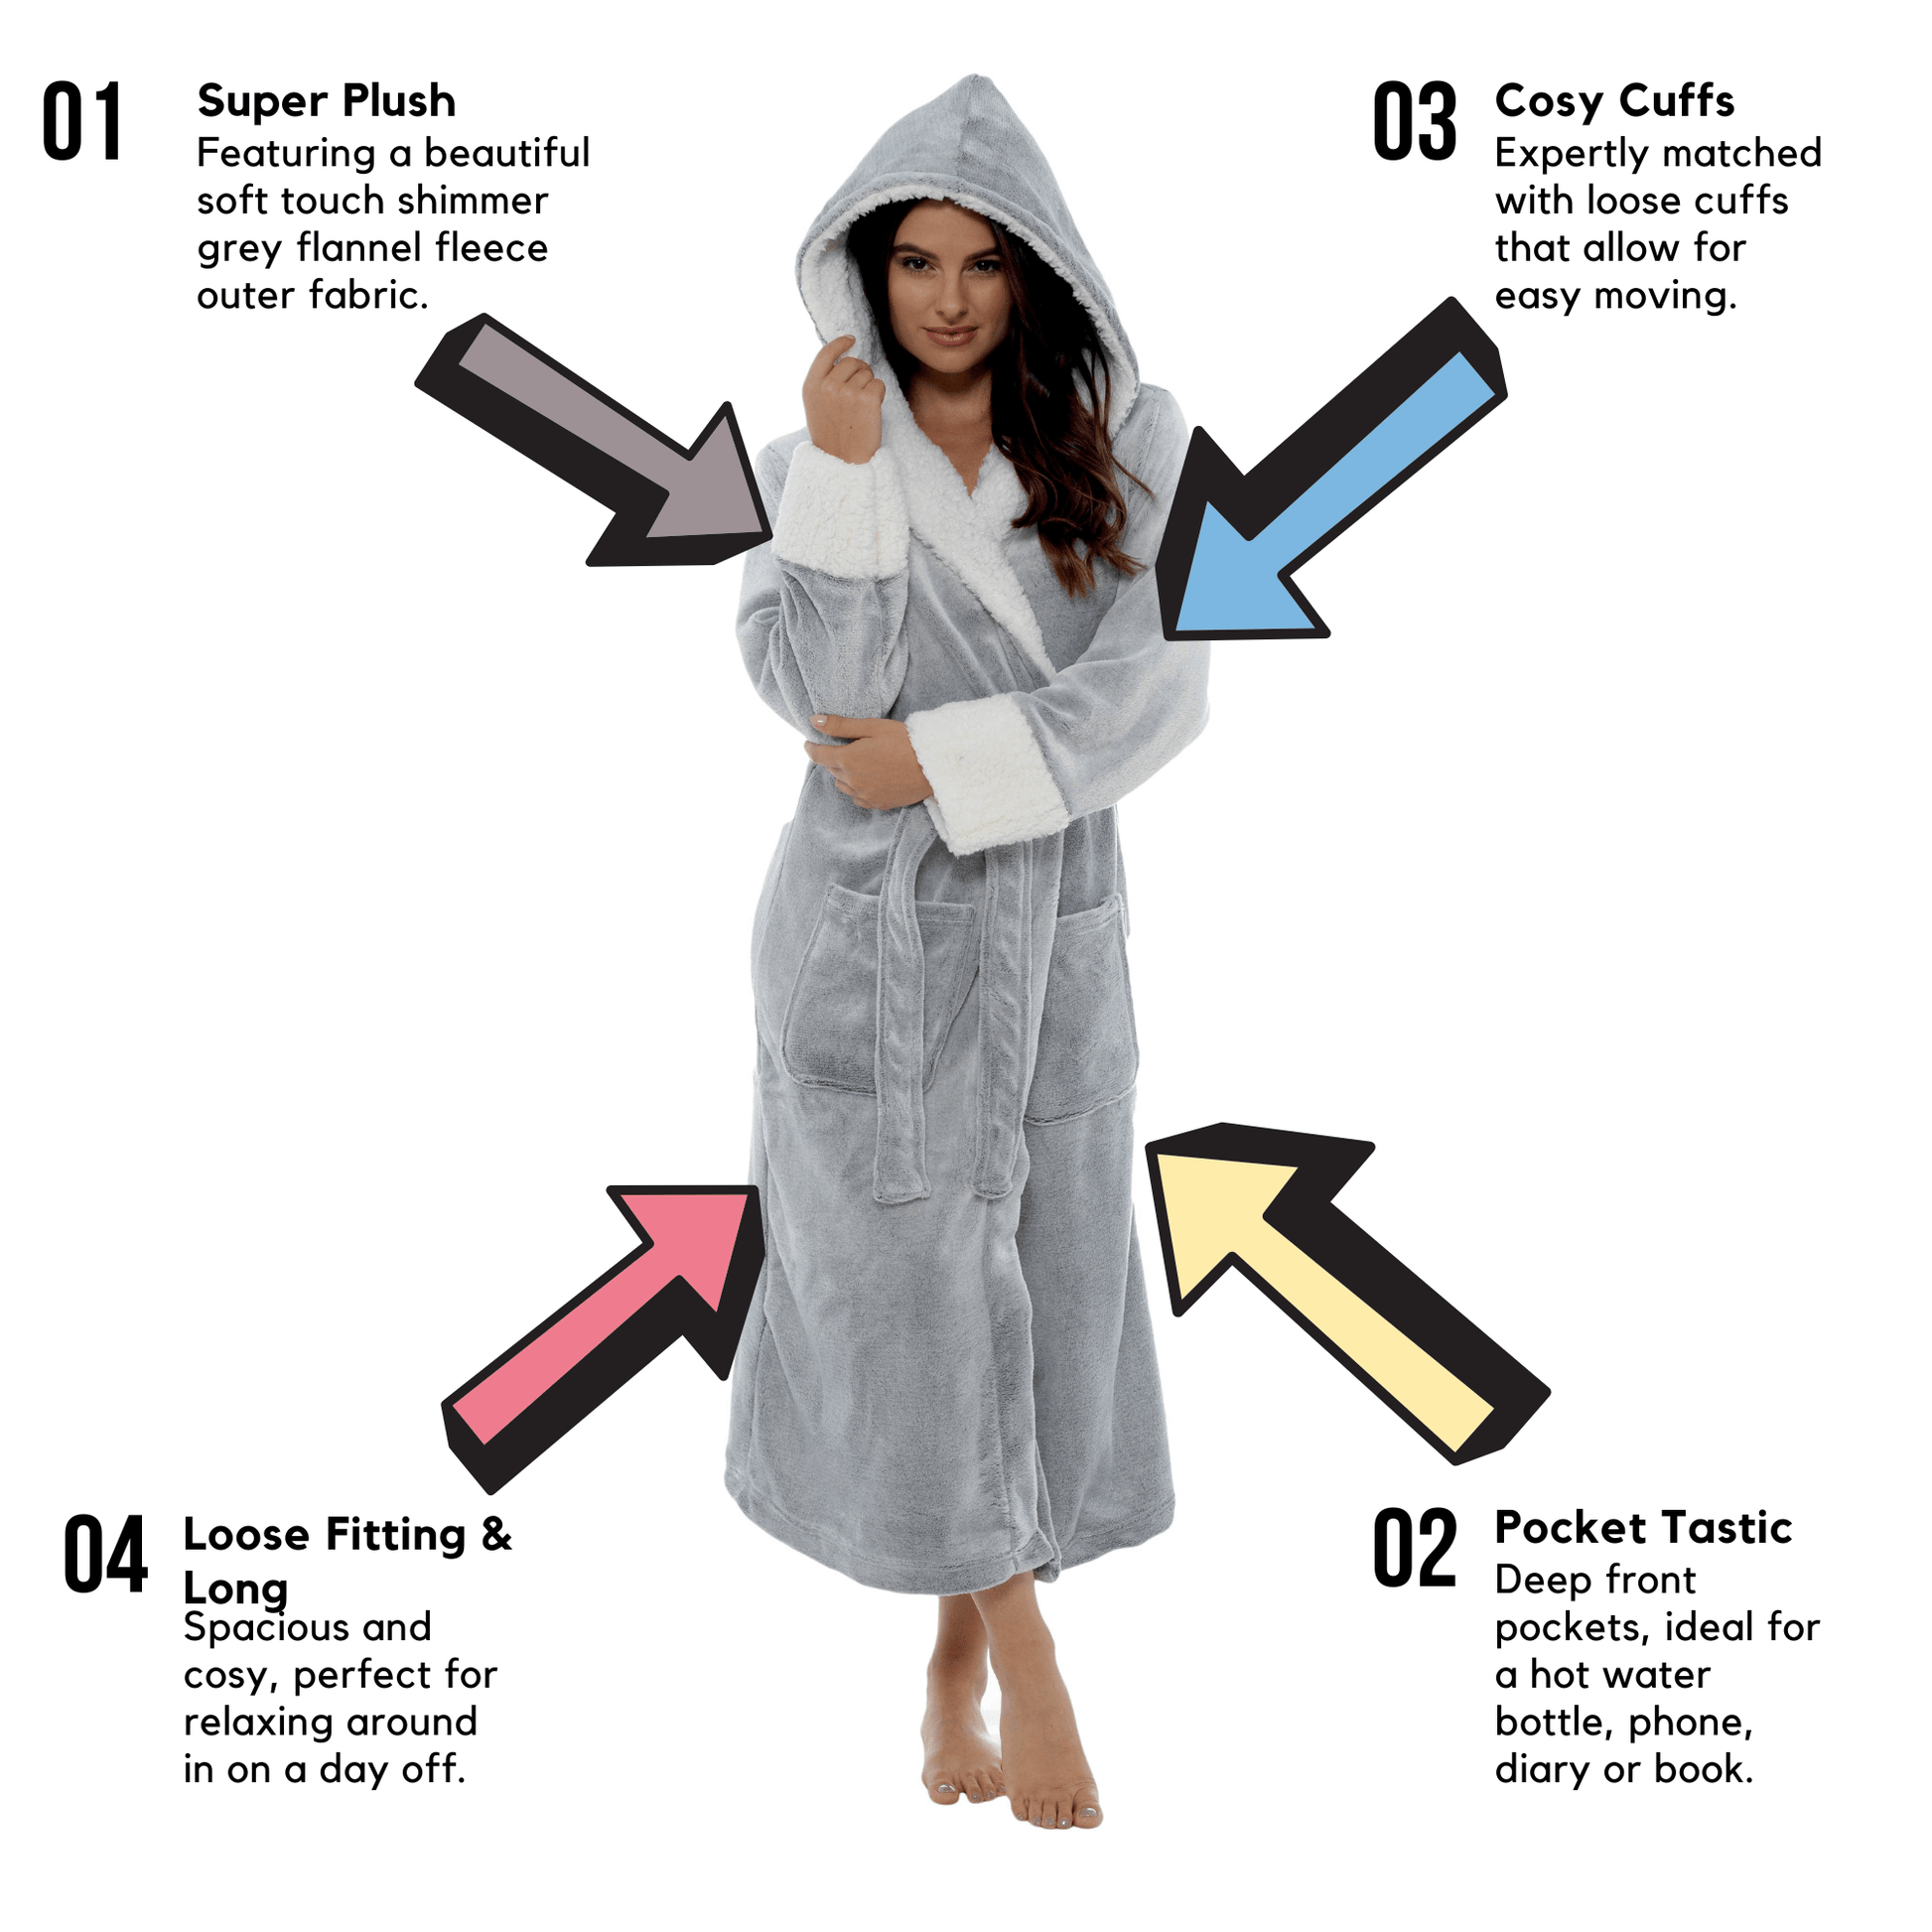 Ladies Luxury Shimmer Fleece Dressing Gown, Women's Soft Plush Bath Robe. Buy now for £20.00. A Robe by Daisy Dreamer. 12-14, 16-18, 20-22, 8-10, bath robe, bathrobe, bathwrap, bridesmaid, chunky lounge, comfortable, cosy, dressing, dressing gown, flannel